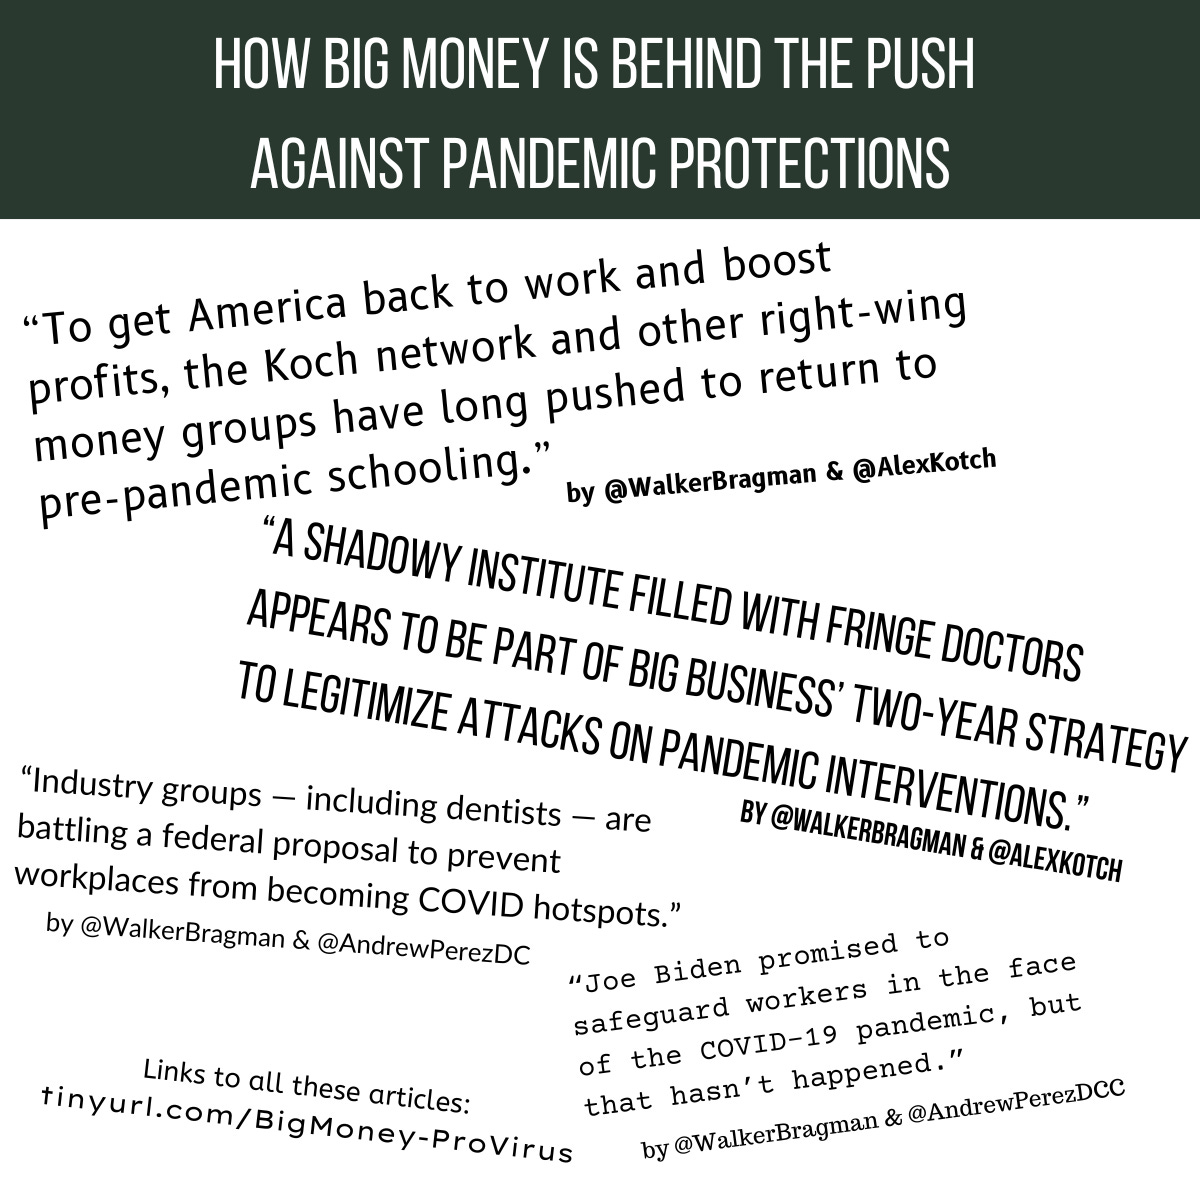 How Big Money is Behind the Push Against Pandemic Protections To get America back to work and boost profits, the Koch network and other right-wing money groups have long pushed to return to pre-pandemic schooling. by @WalkerBragman & @AlexKotch A shadowy institute filled with fringe doctors appears to be part of big business’ two-year strategy to legitimize attacks on pandemic interventions. by @WalkerBragman & @AlexKotch Industry groups — including dentists — are battling a federal proposal to prevent workplaces from becoming COVID hotspots. by @WalkerBragman & @AndrewPerezDC “Joe Biden promised to safeguard workers in the face of the COVID-19 pandemic, but that hasn’t happened.” by @WalkerBragman & @AndrewPerezDC Links to all these articles: tinyurl.com/BigMoney-ProVirus